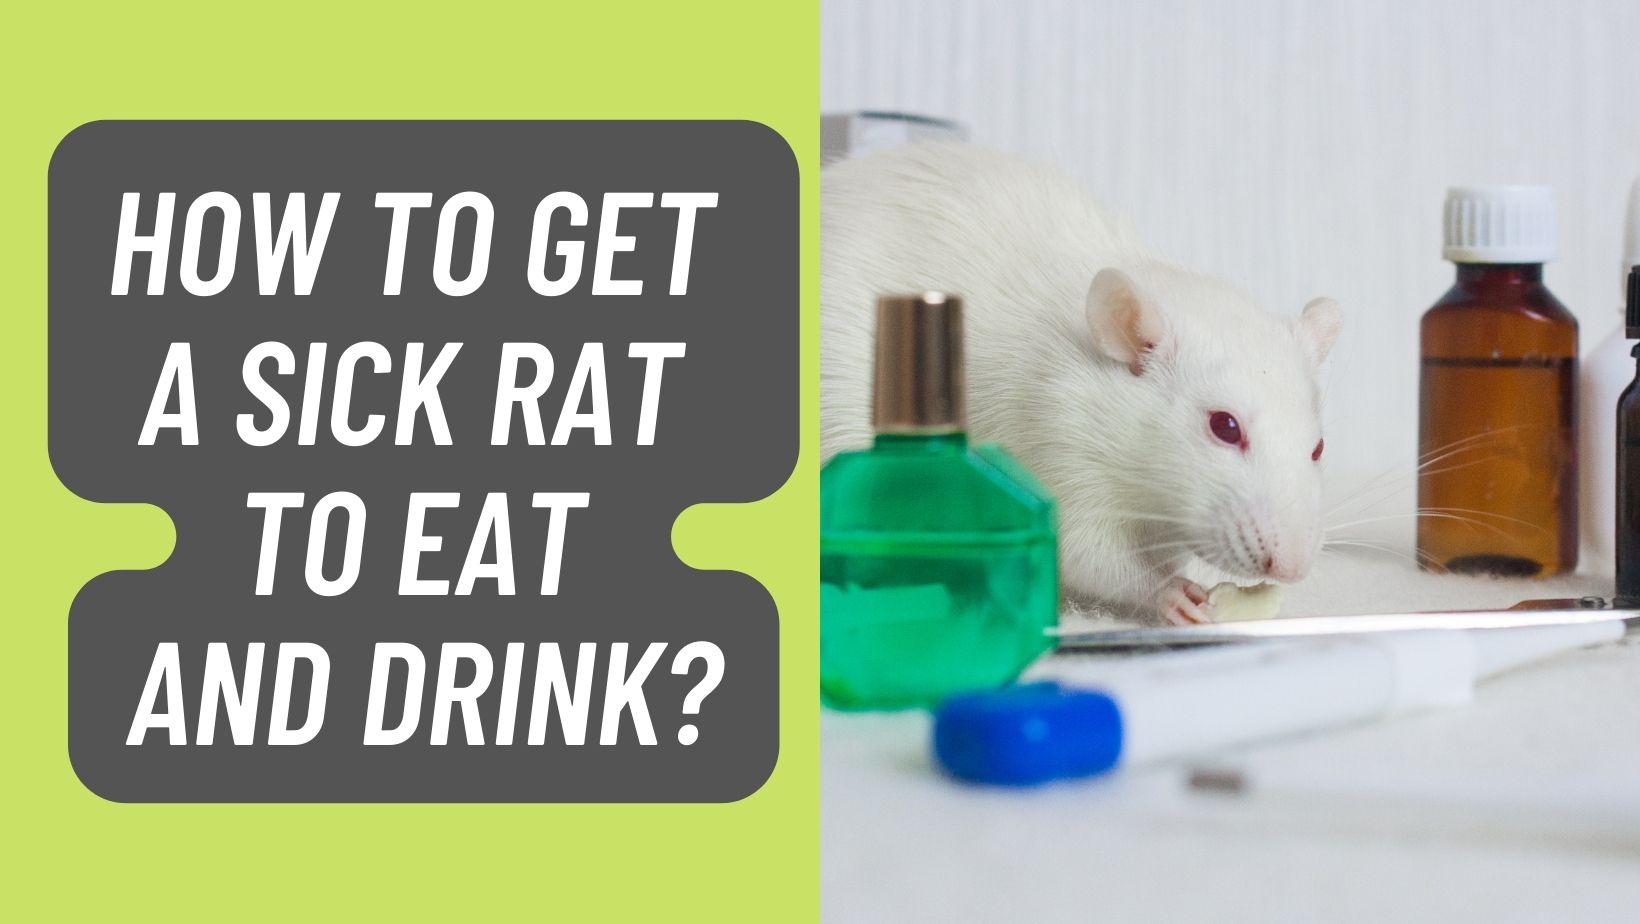 How to Get a Sick Rat to Eat and Drink